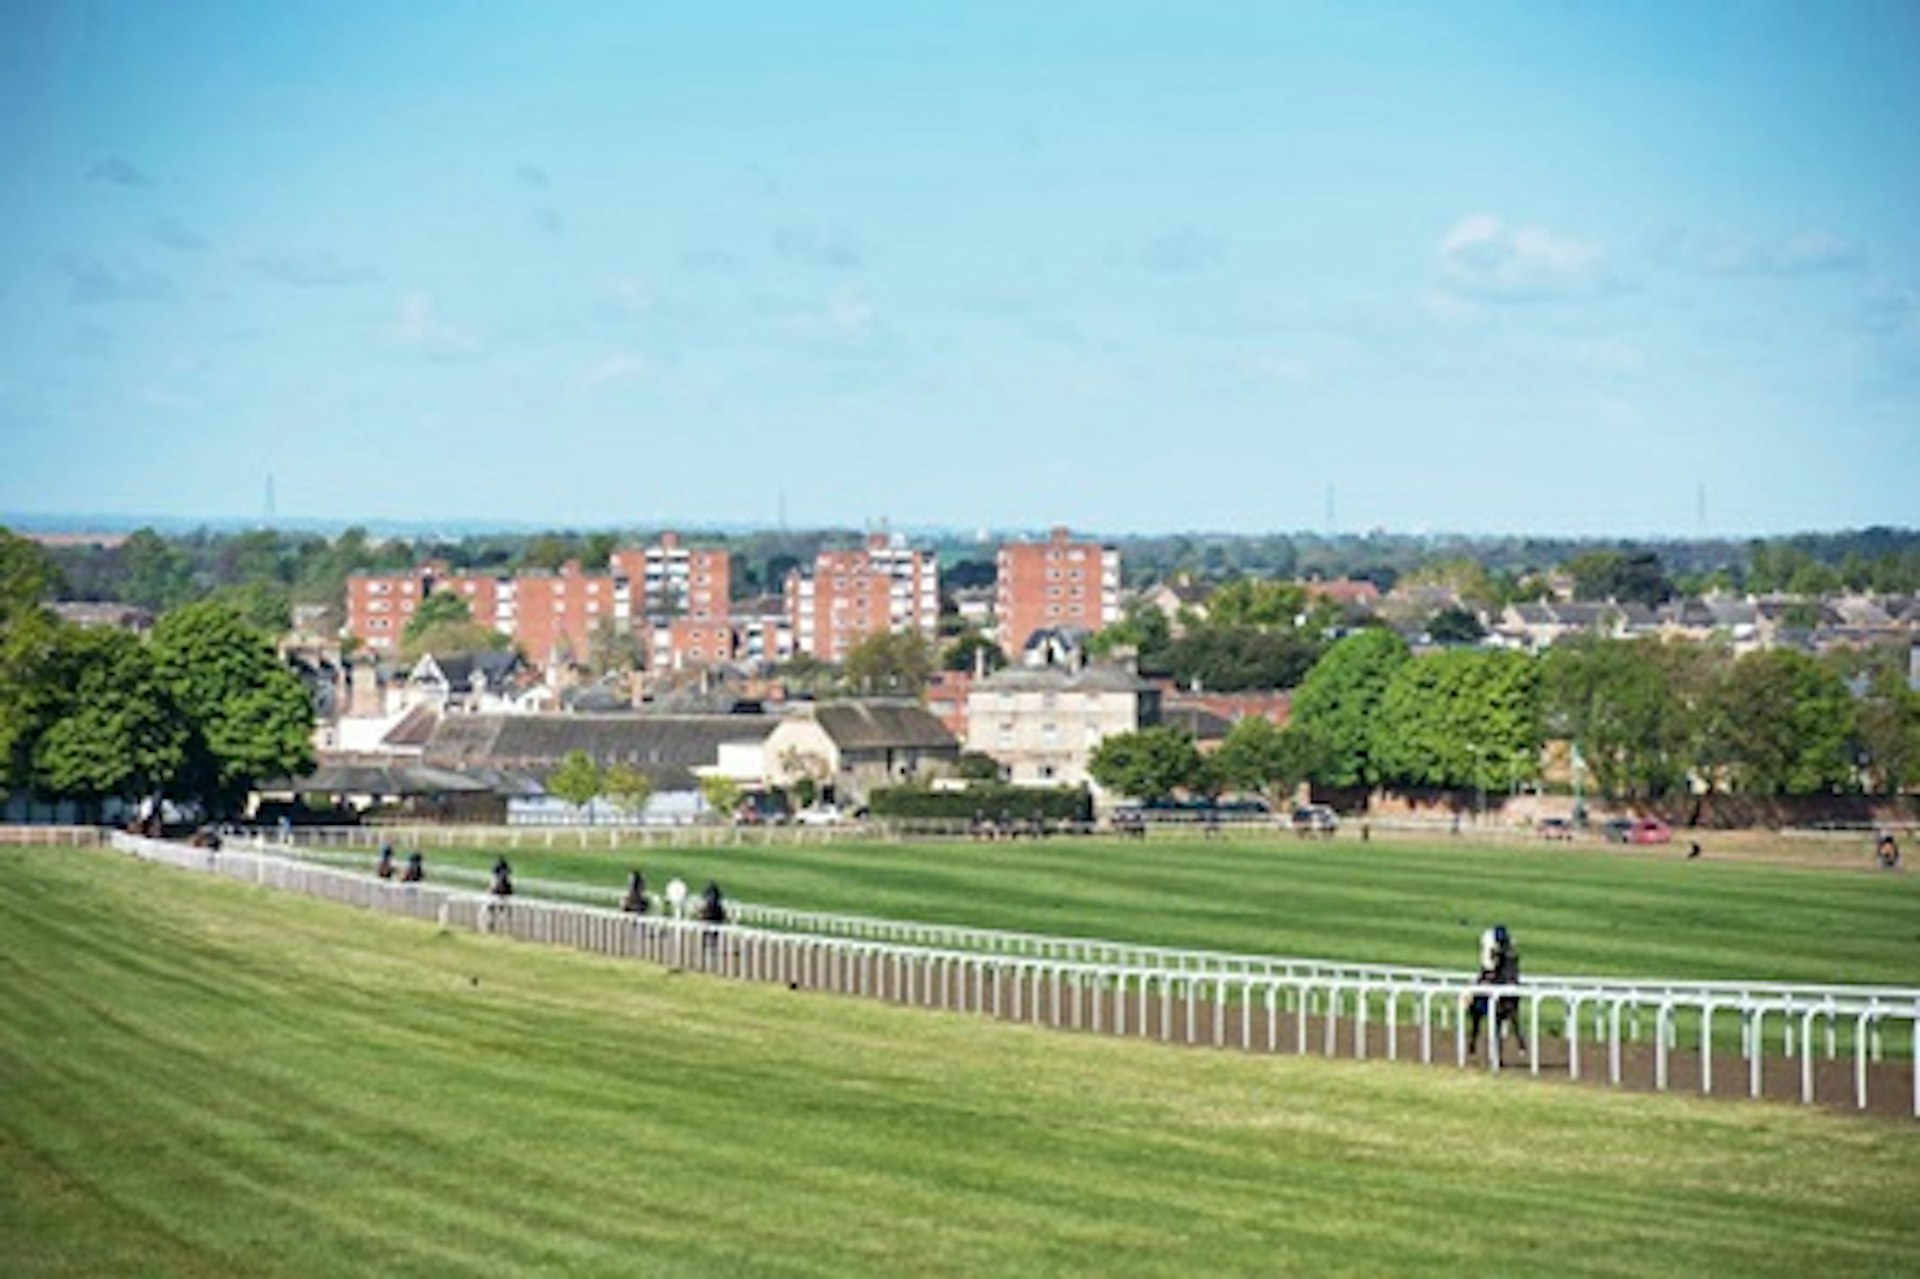 Horse Racing Lover's Experience with Behind the Scenes Half Day Guided Tour at Newmarket 2